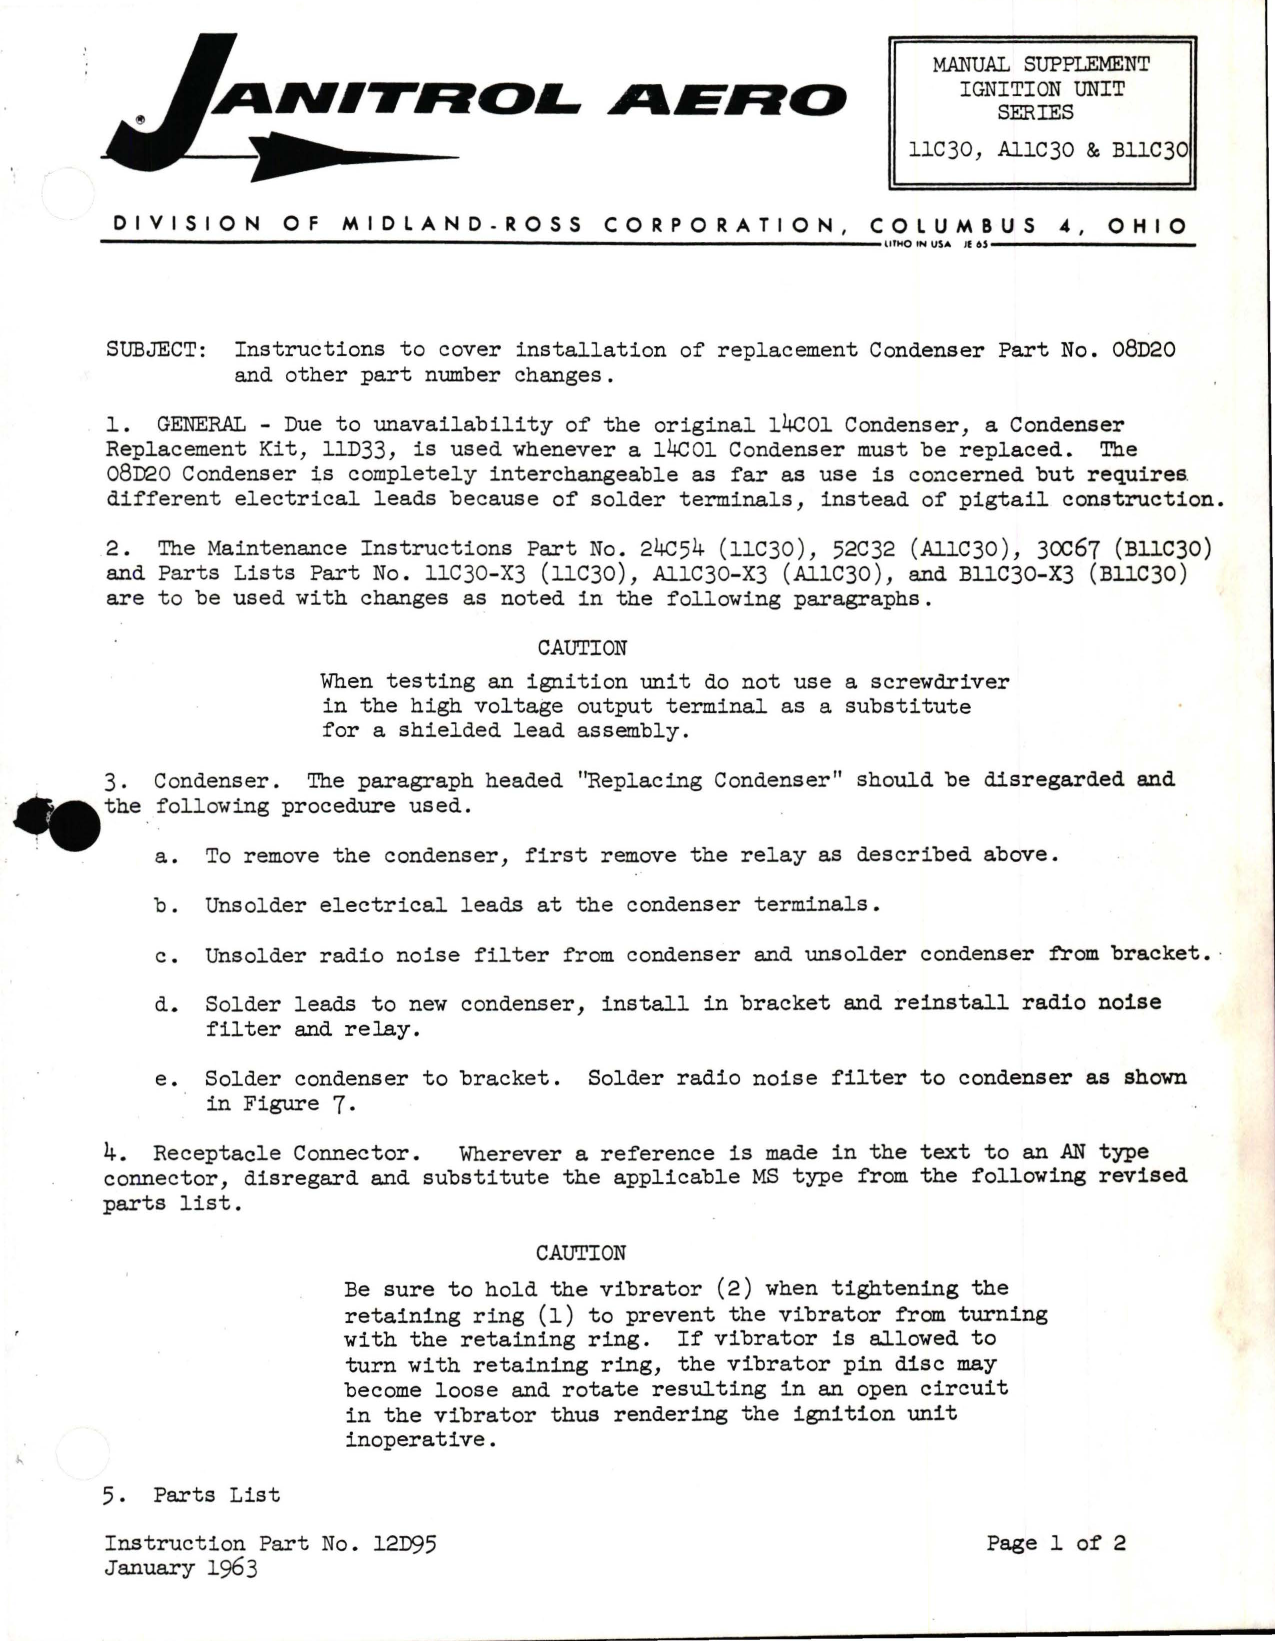 Sample page 1 from AirCorps Library document: Manual Supplement for Ignition Unit 11C30, A11C30, and B11C30 Series